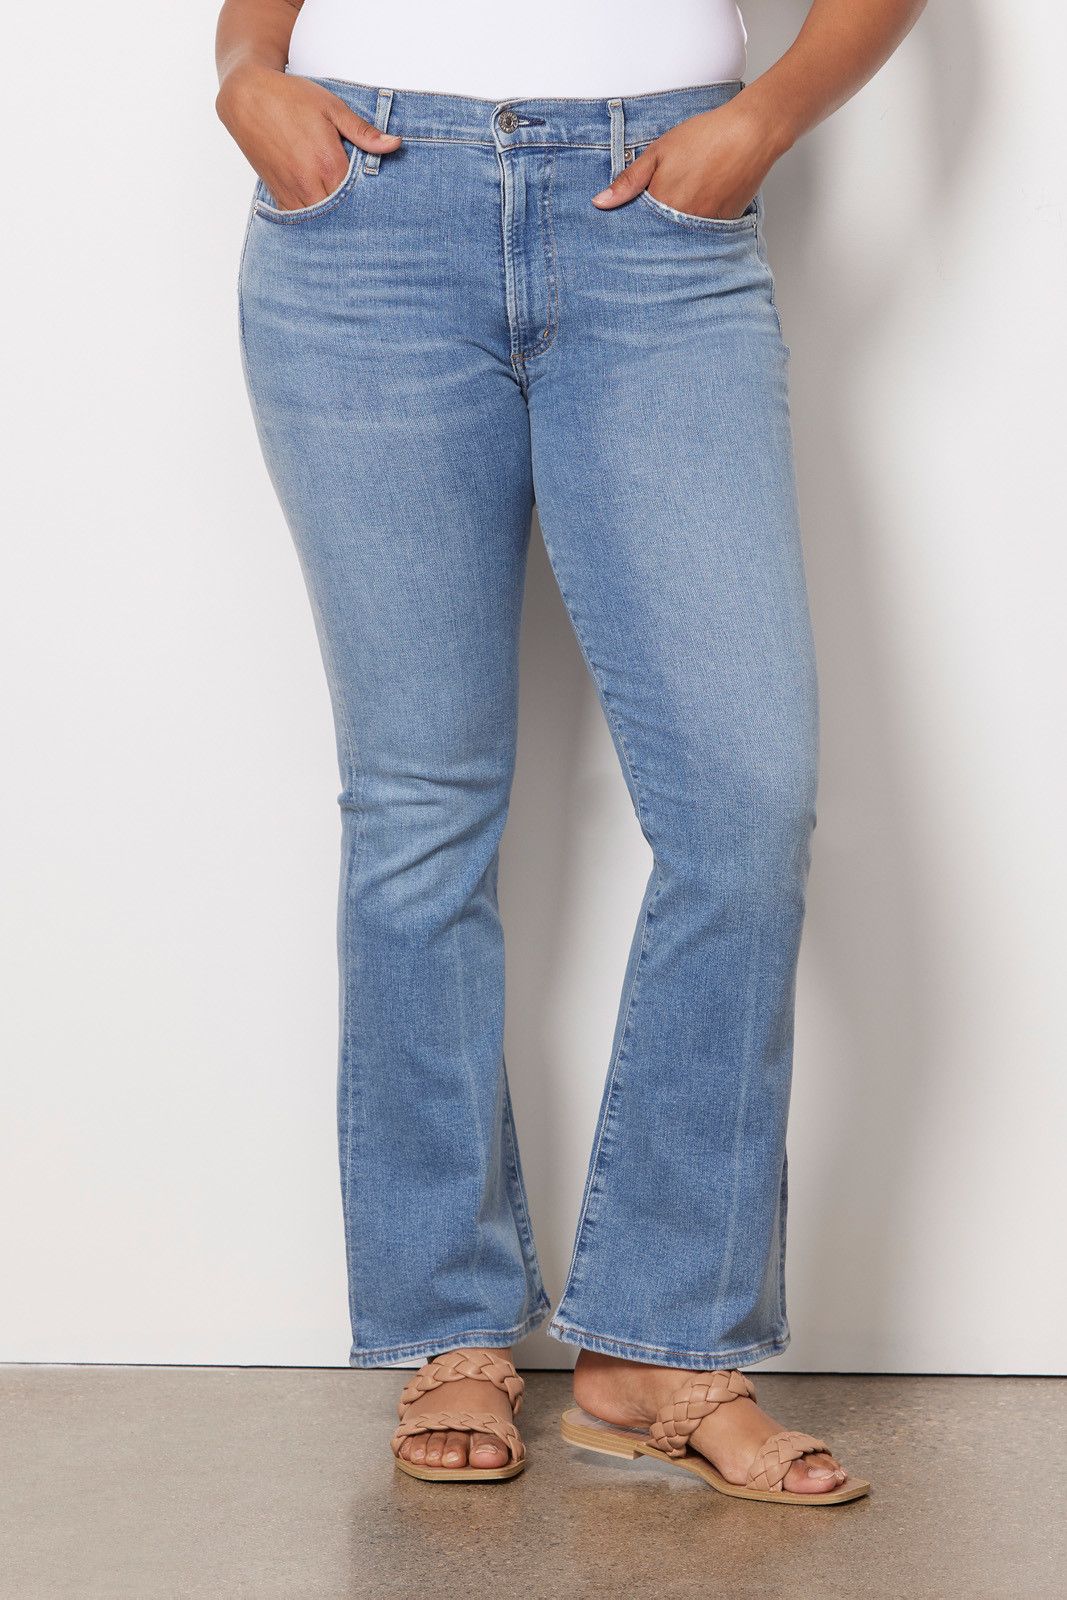 CITIZENS OF HUMANITY Lilah High Rise Bootcut | EVEREVE | Evereve